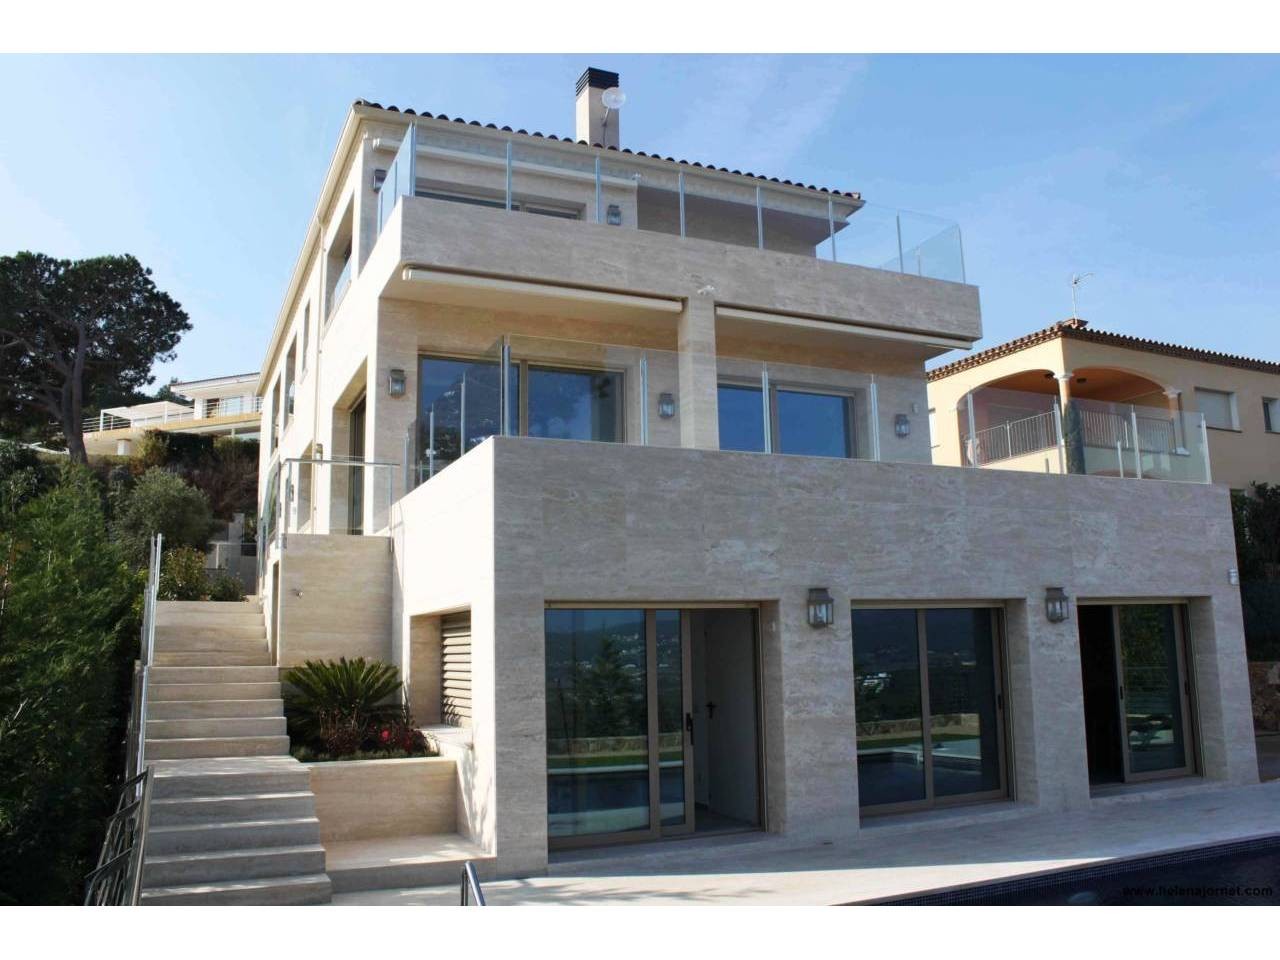 Wonderful luxury house with outdoor and indoor swimming pools and two large terraces with views - 20033